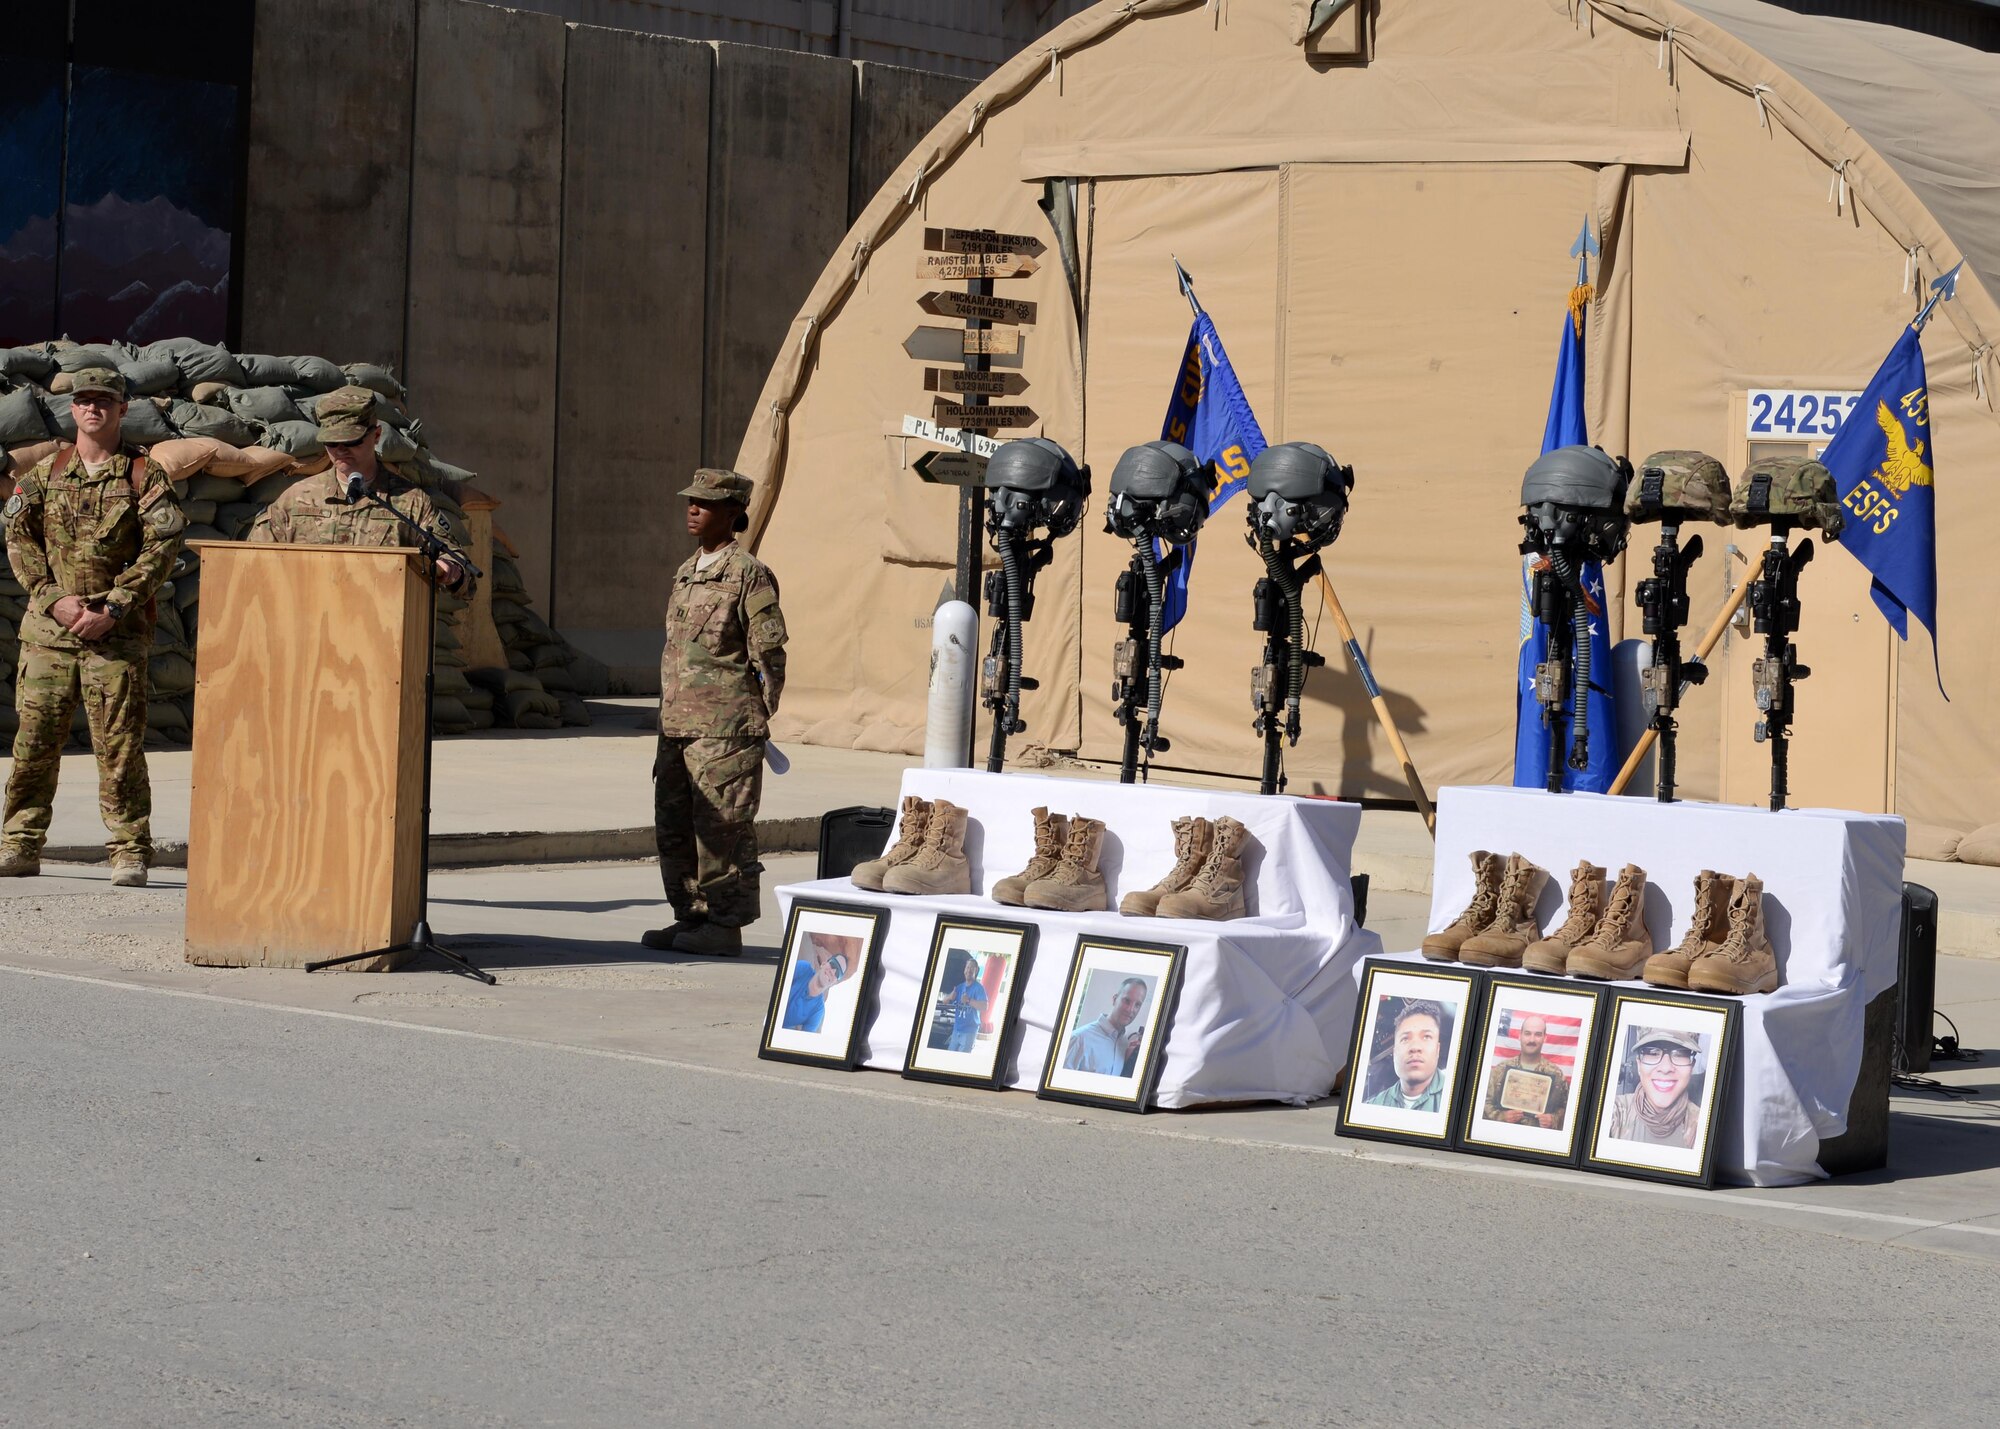 Maj. Met Berisha, 455th Expeditionary Security Forces Squadron commander, shares his condolences for six fallen Airmen during a fallen comrade memorial ceremony Oct. 3, 2015, at Bagram Airfield, Afghanistan. The Airmen lost their lives when their C-130J Super Hercules crashed shortly after takeoff from Jalalabad Airfield in Afghanistan, Oct. 2, 2015. Capts. Jordan Pierson and Jonathan Golden, Staff Sgt. Ryan Hammond and Senior Airman Quinn Johnson-Harris were pilots and crew members. Airman 1st Class Kcey Ruiz and Senior Airman Nathan Sartain were security forces fly away security team members. (U.S. Air Force photo/Senior Airman Cierra Presentado)